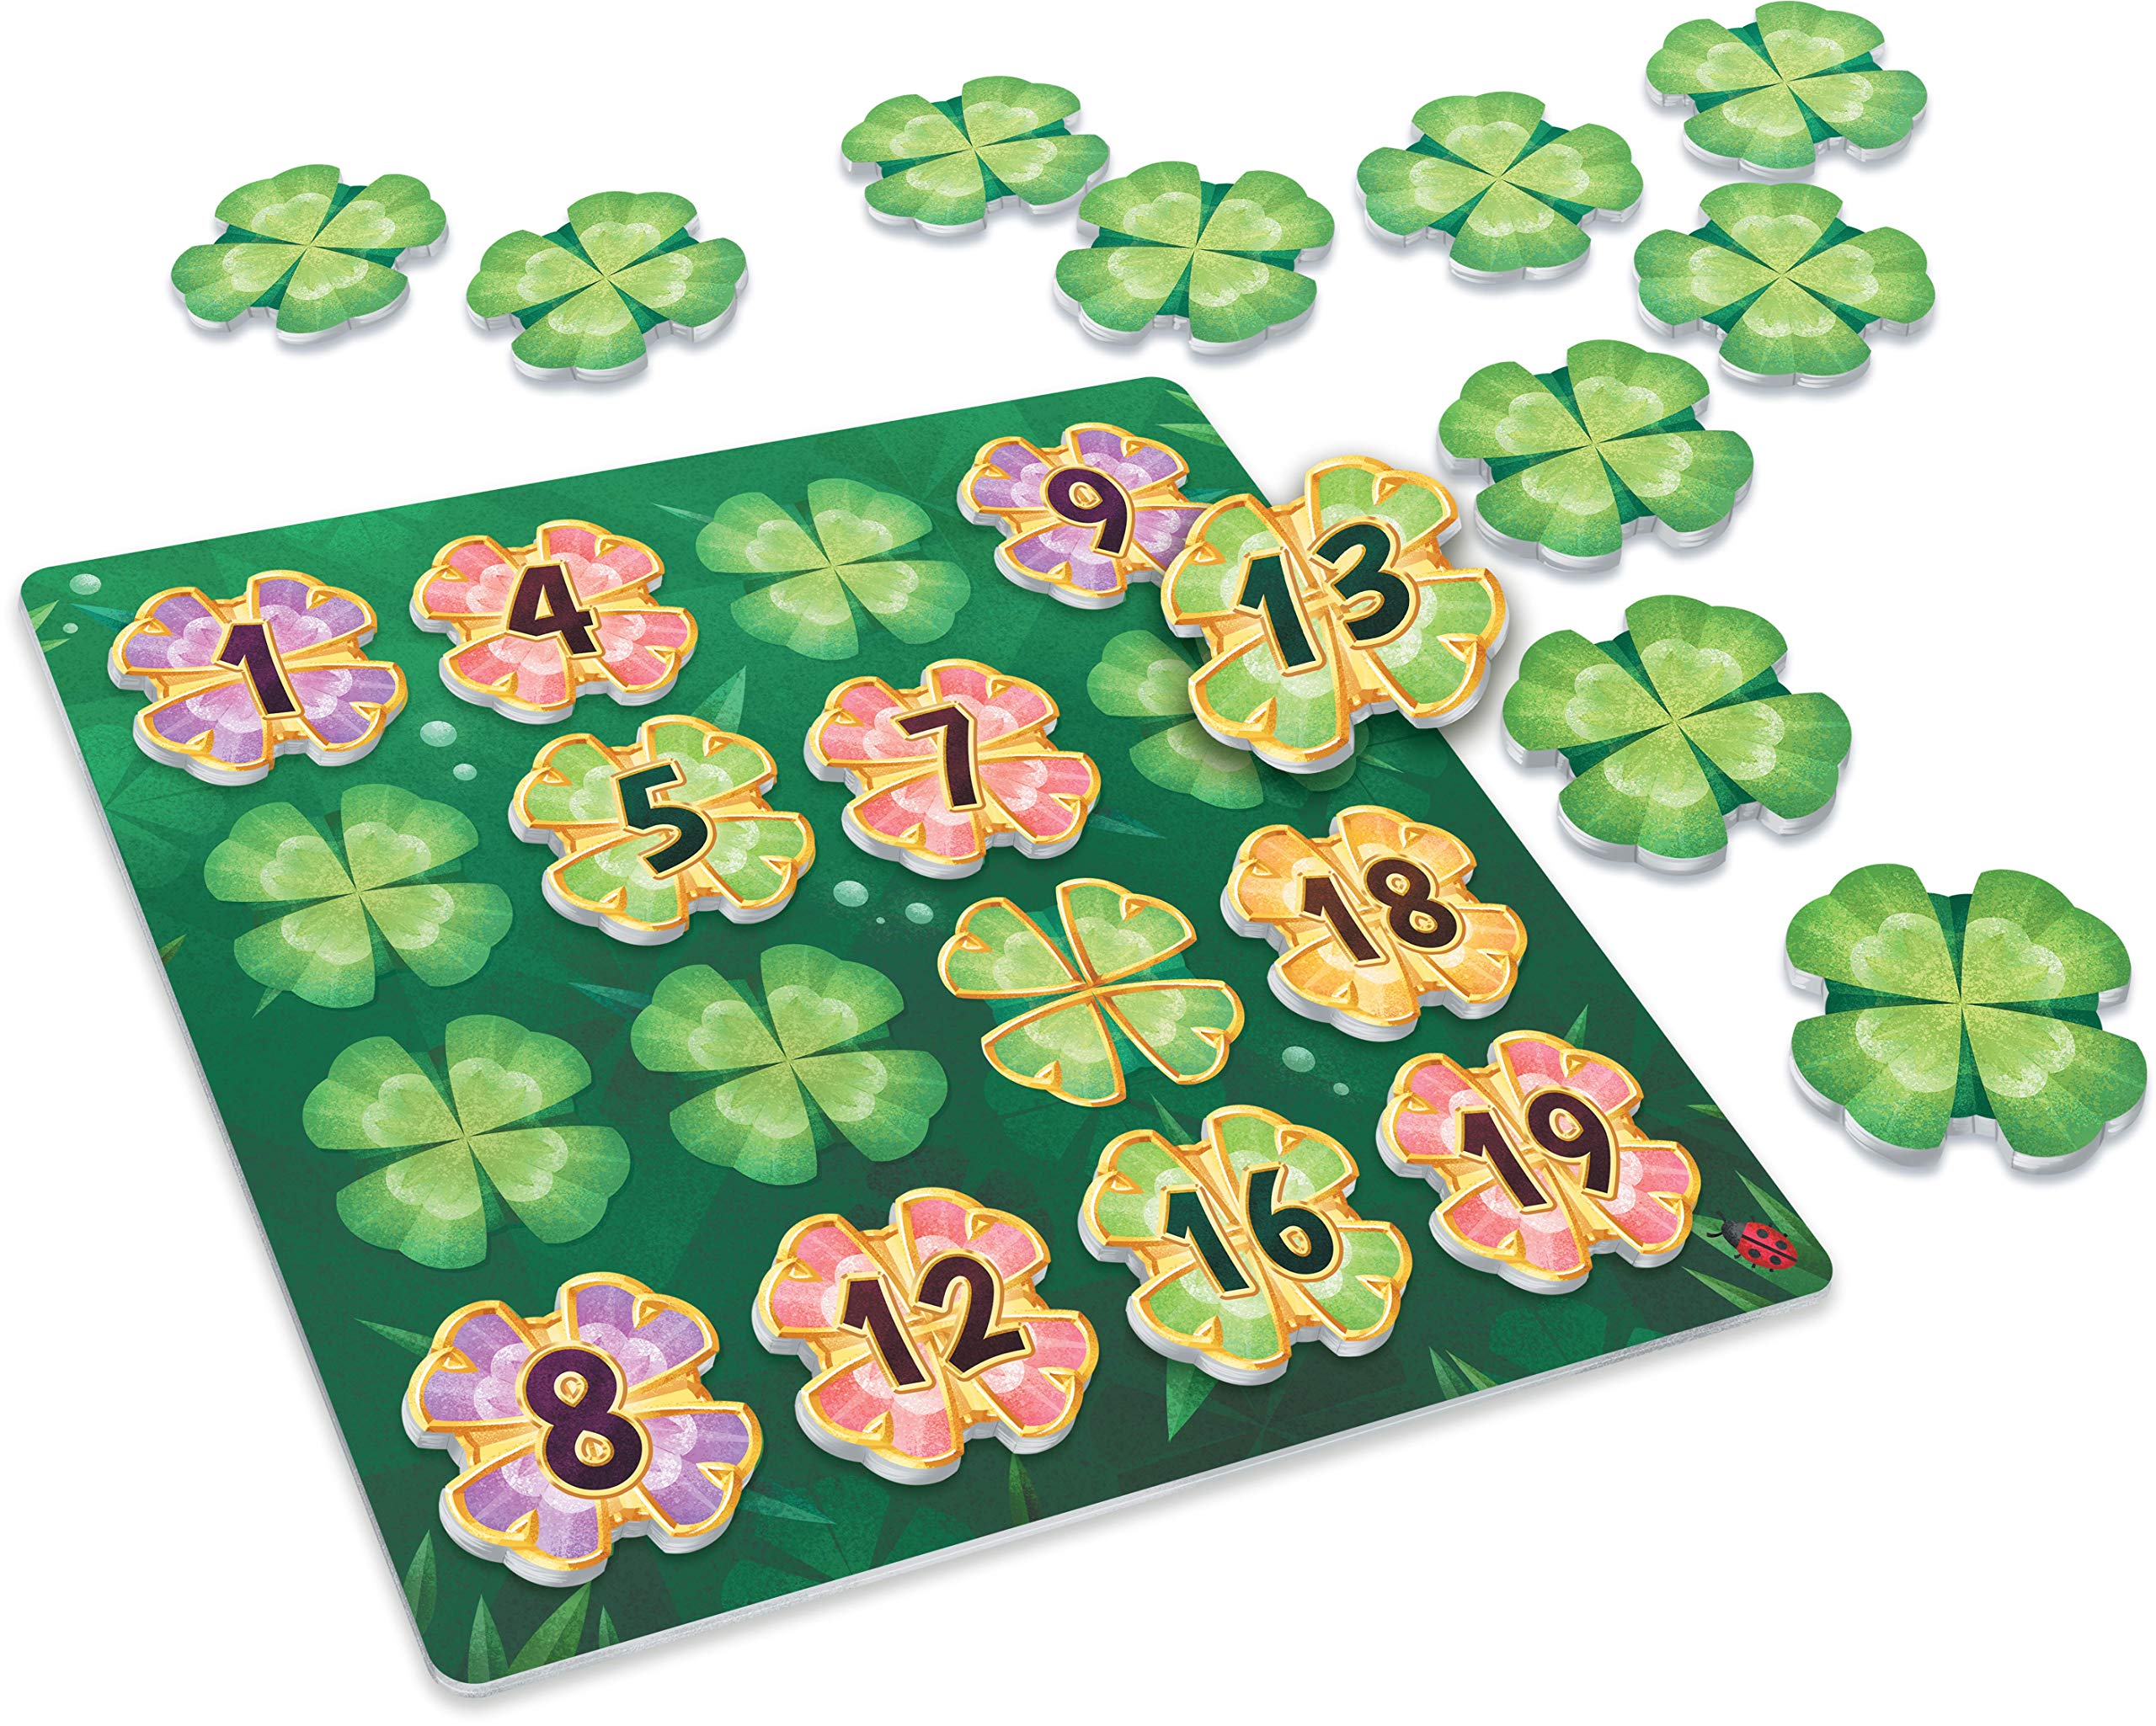 Tiki Editions Lucky Numbers - Be First to Complete Your Garden; 1 Rule - Numbers in Each Row & Each Column Must be Arranged in Ascending Order; Draw, Place or Swap Clovers, 1-4 Players, 20 min, 8+